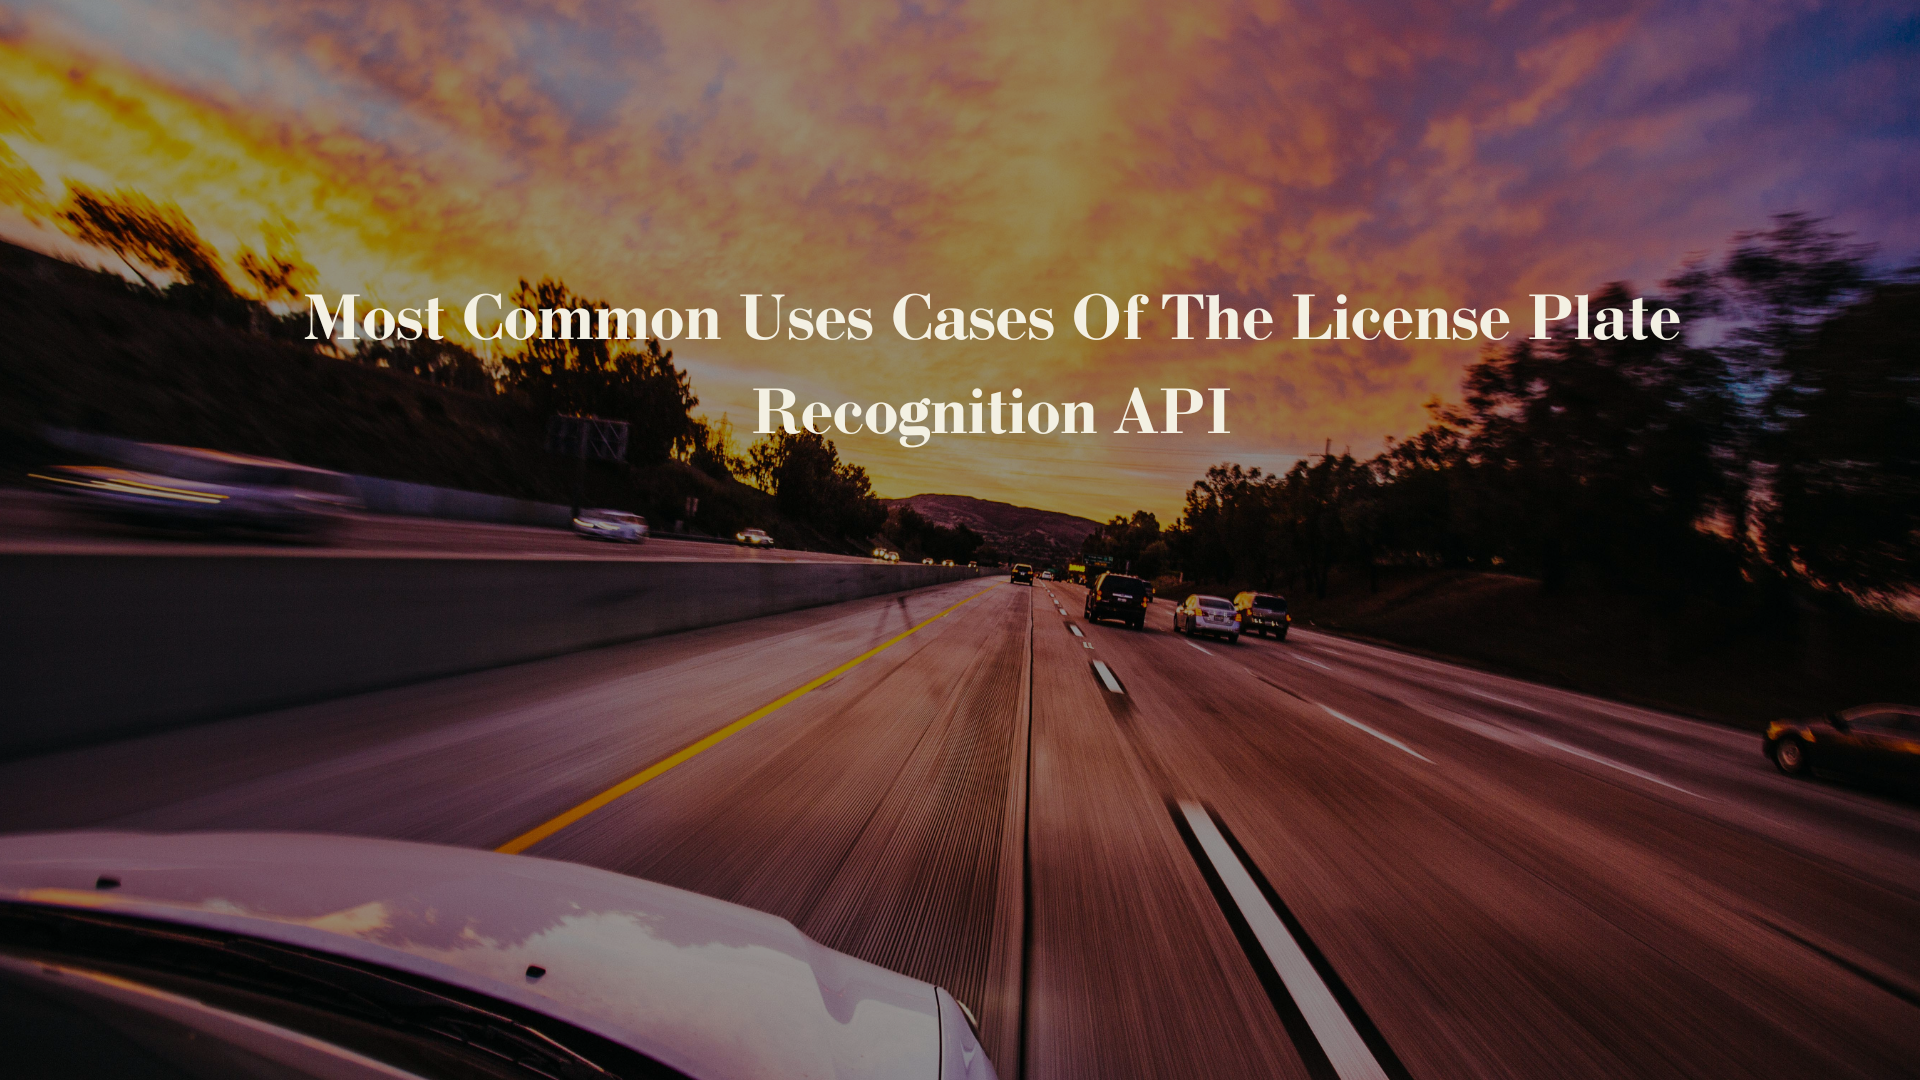 Most Common Uses Cases Of The License Plate Recognition API